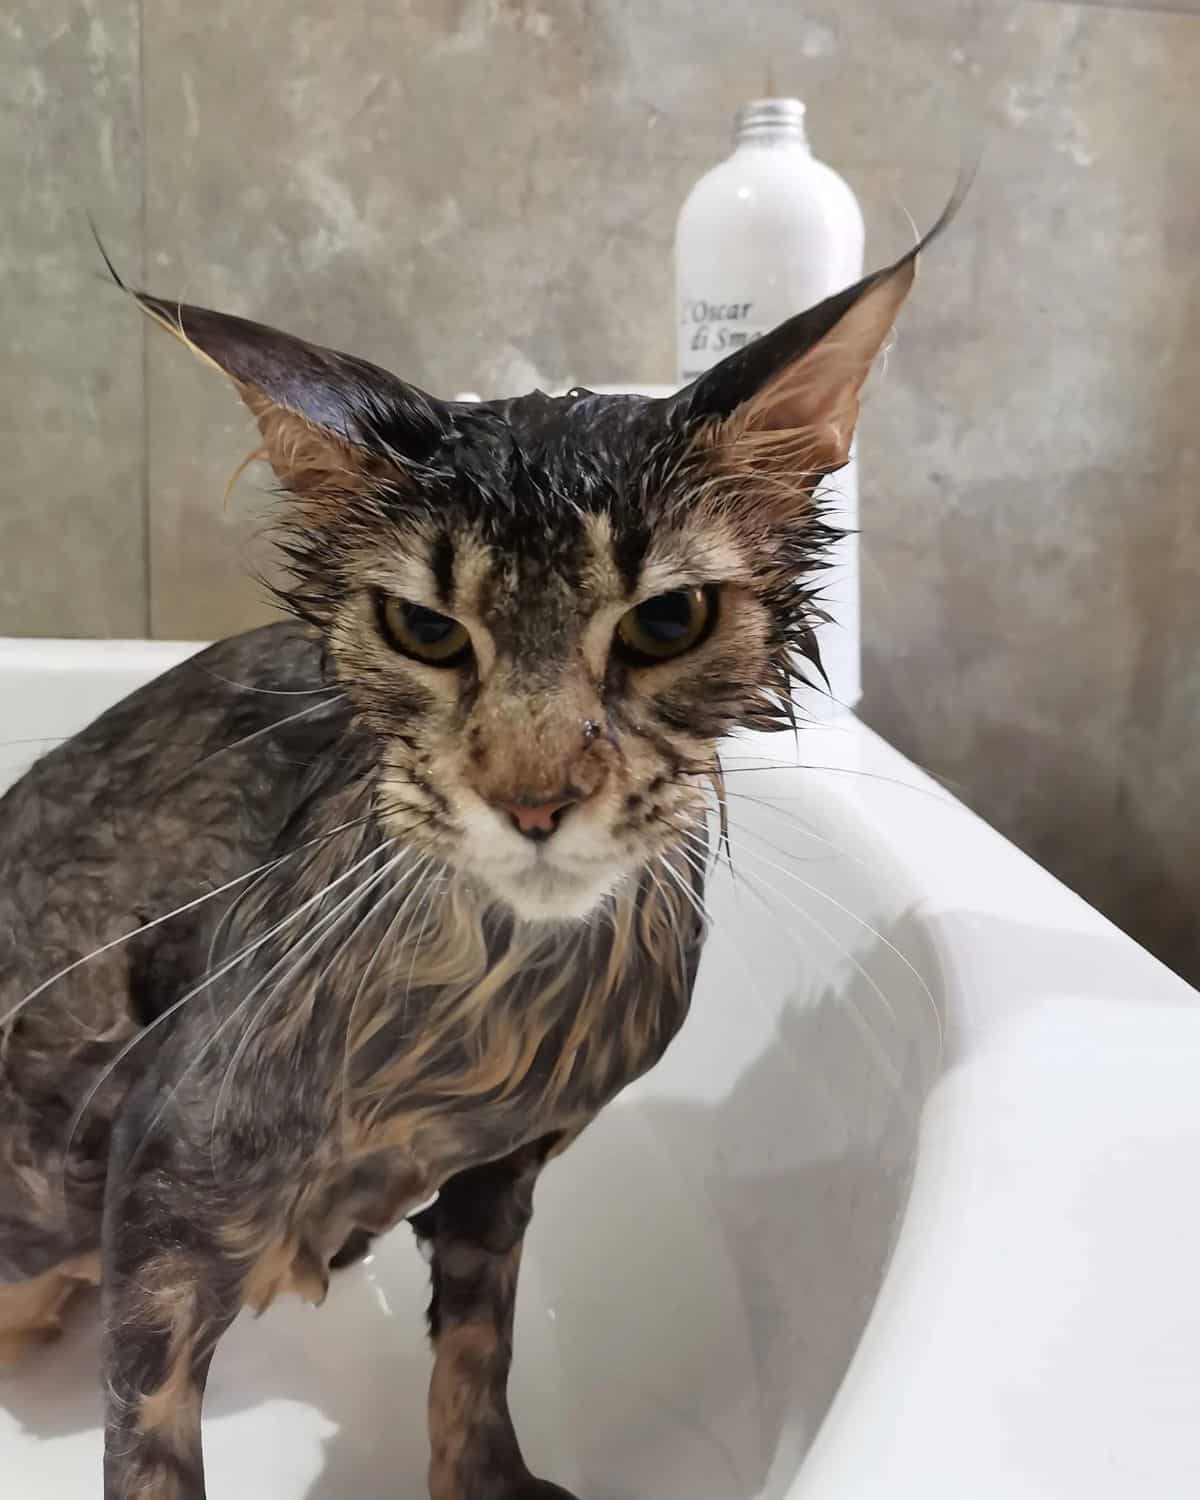 An angry-looking tabby maine coon taking a bath.